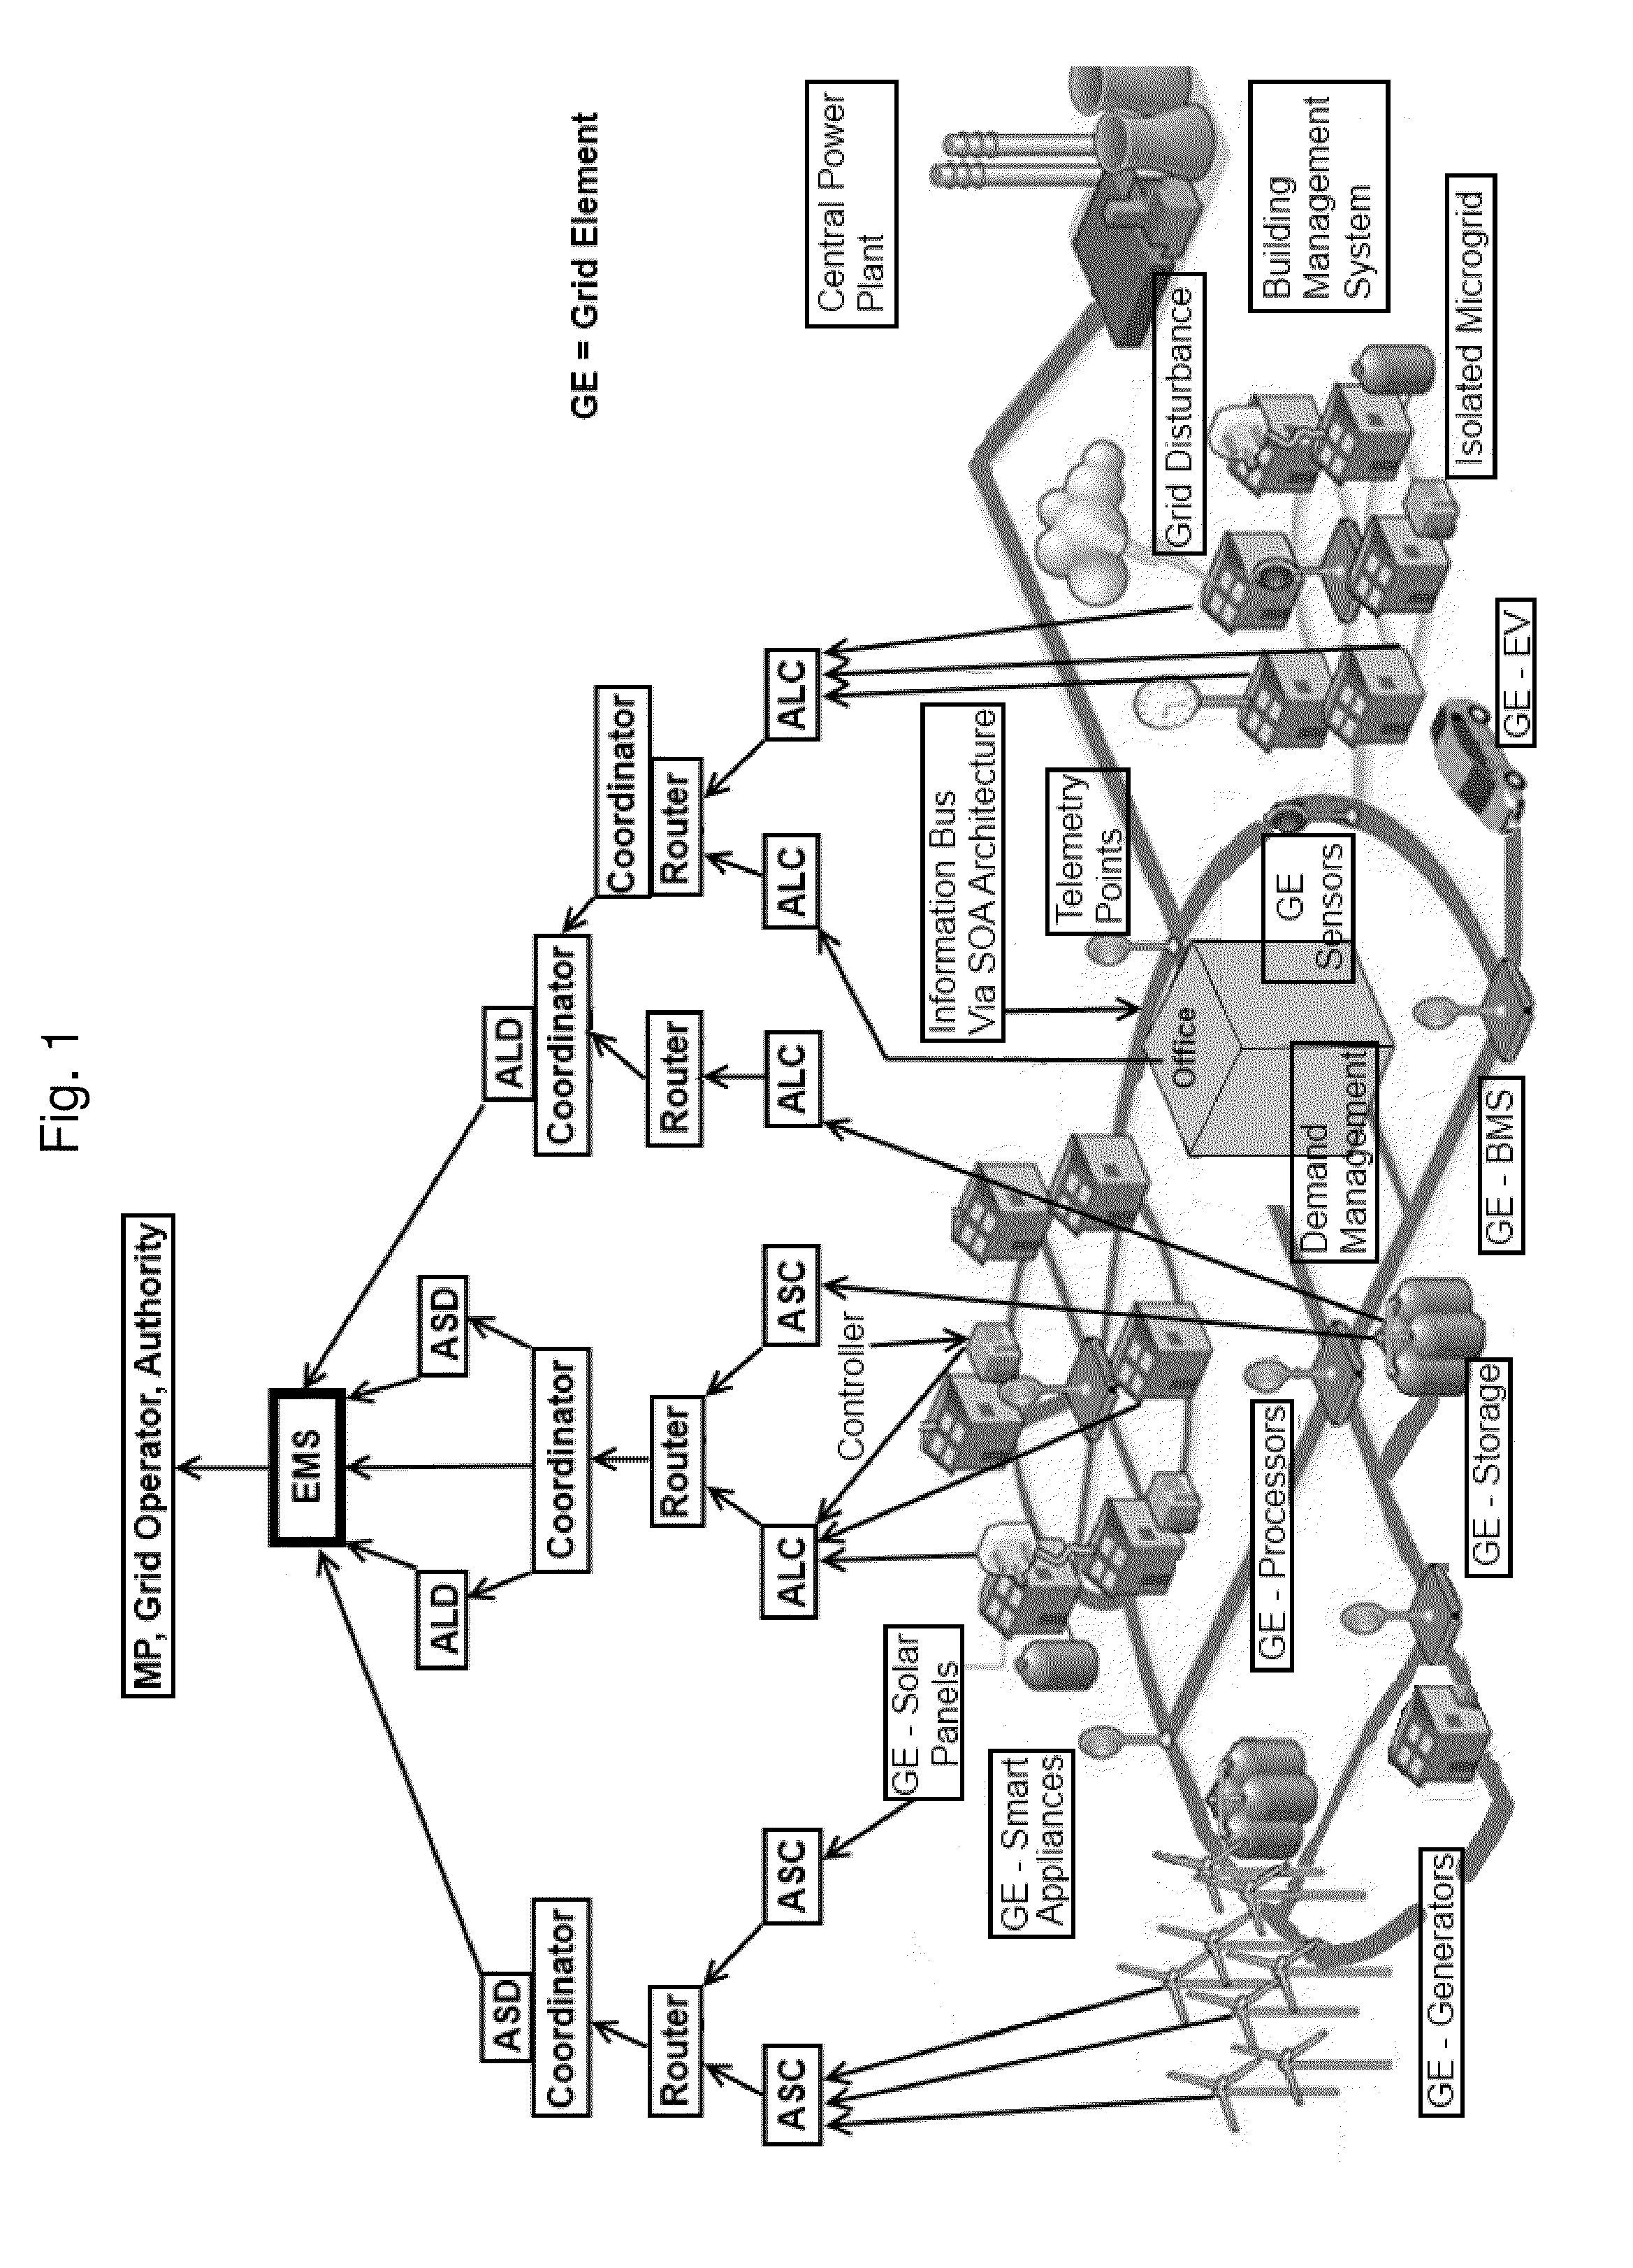 System, method, and apparatus for electric power grid and network management of grid elements